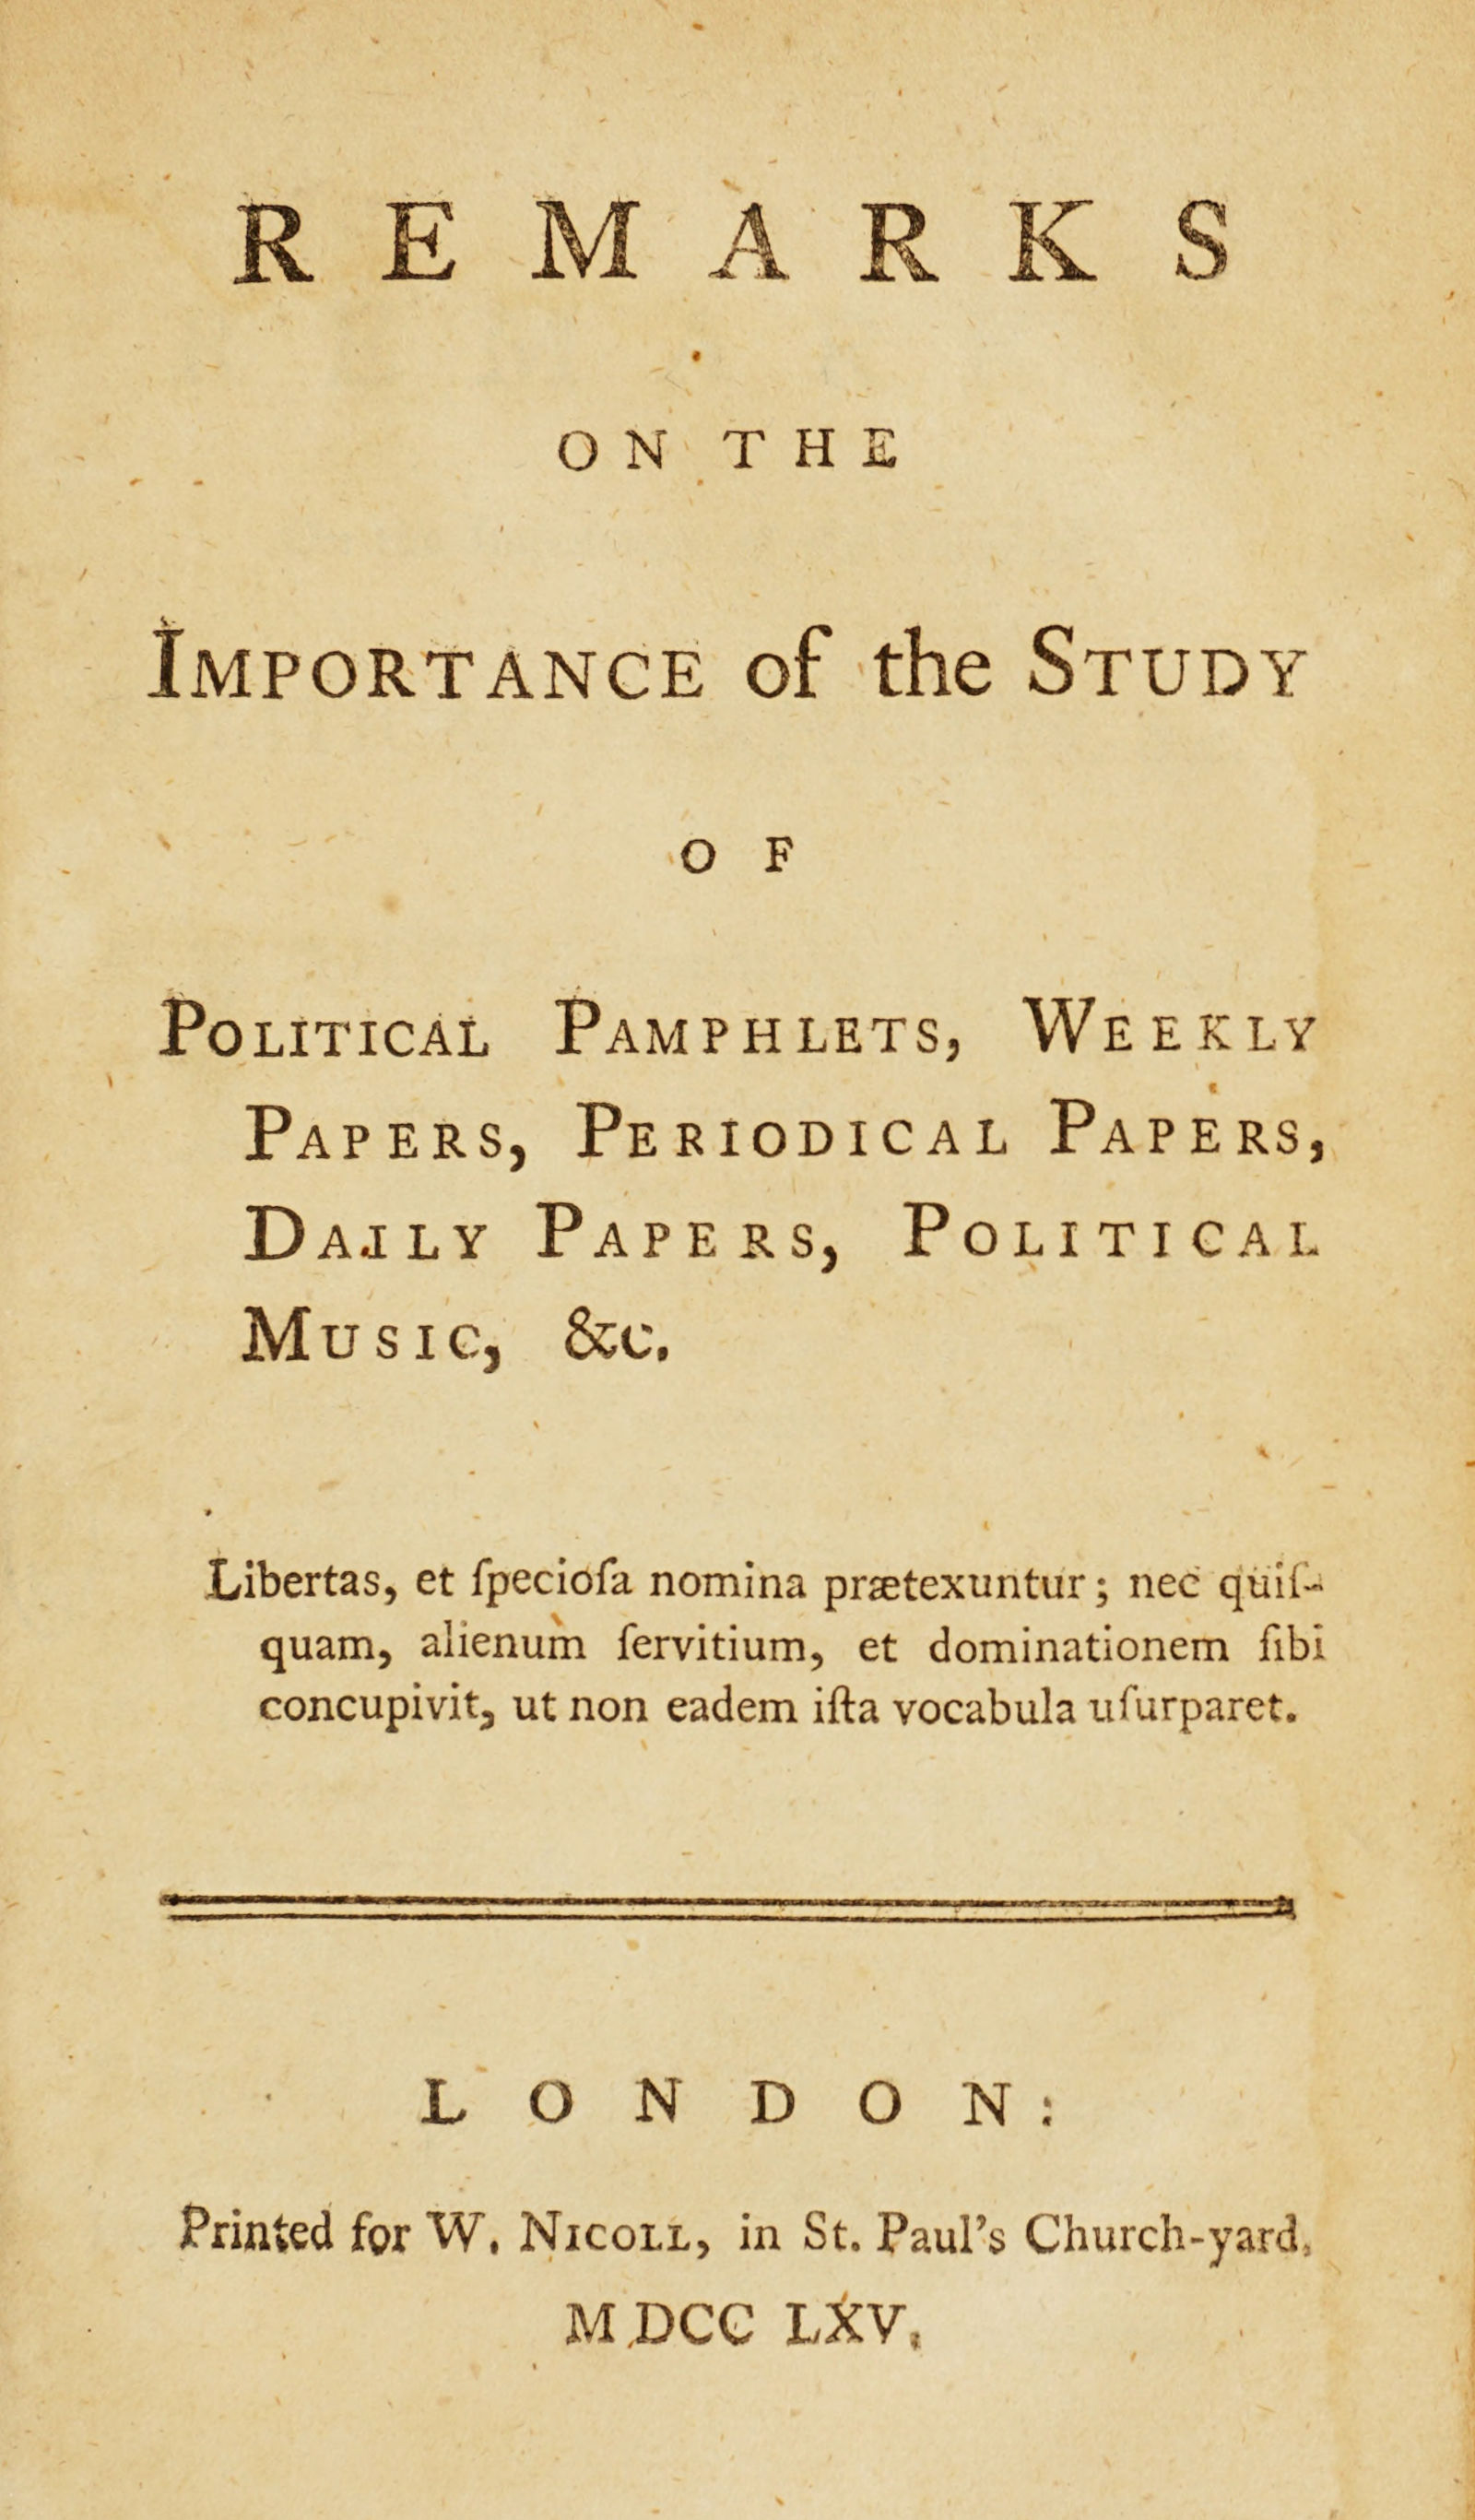 Remarks on the Importance of the Study of Political Pamphlets, Weekly Papers, Periodical Papers, Daily Papers, Political Music, &c.